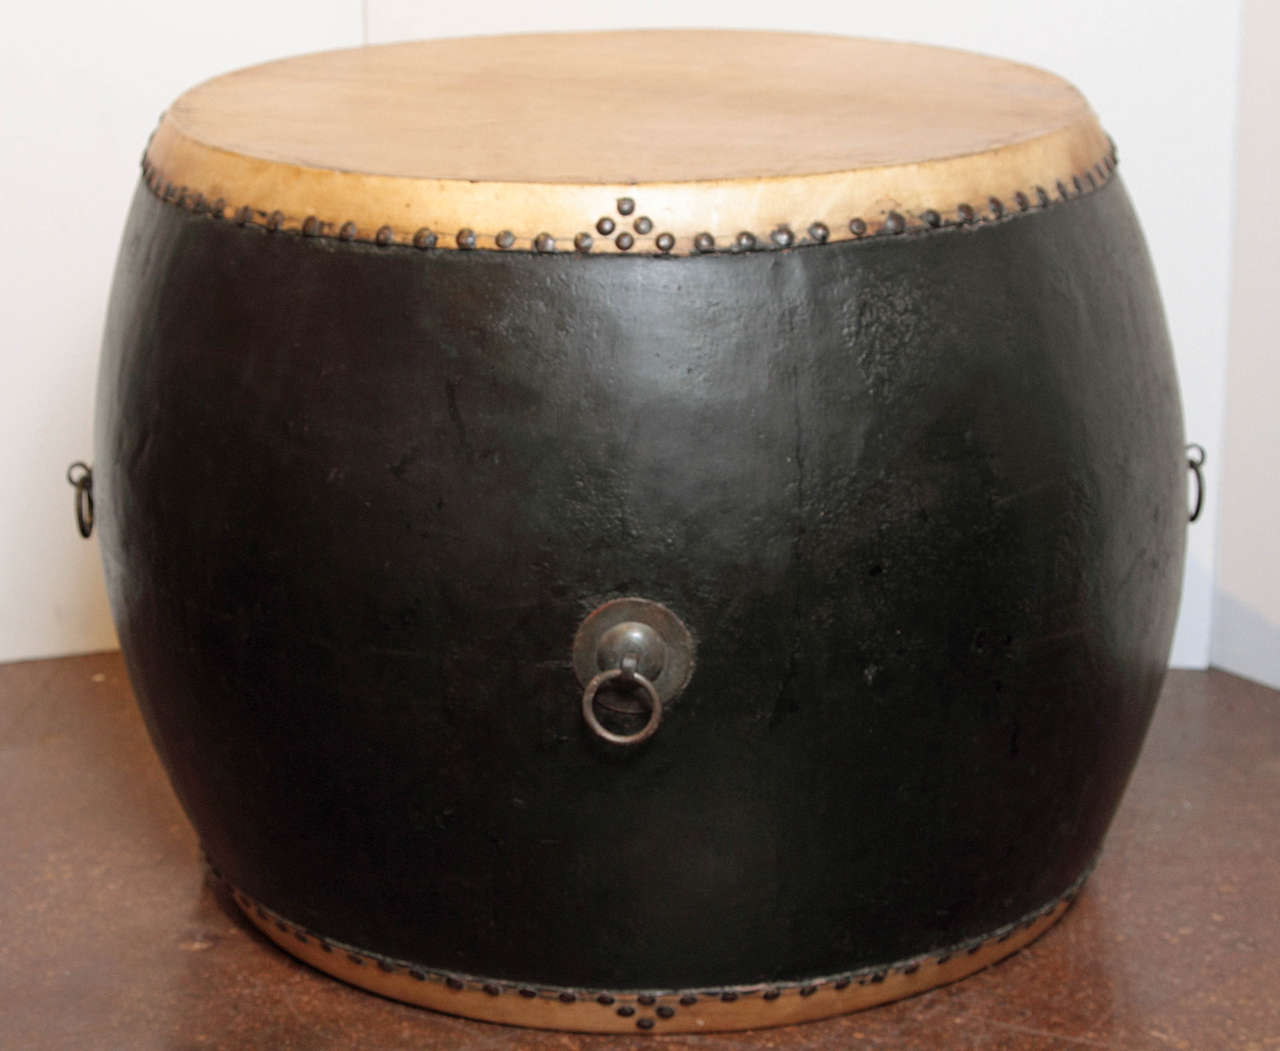 Ceremonial Drum Coffee Table 
20th century Chinese ceremonial drum made of Elm & Leather 
4,000 year old tradition used in festivals and events 
Every detail of nail trims, leather, wood with bronze handles gives an appeal 
can be used as a